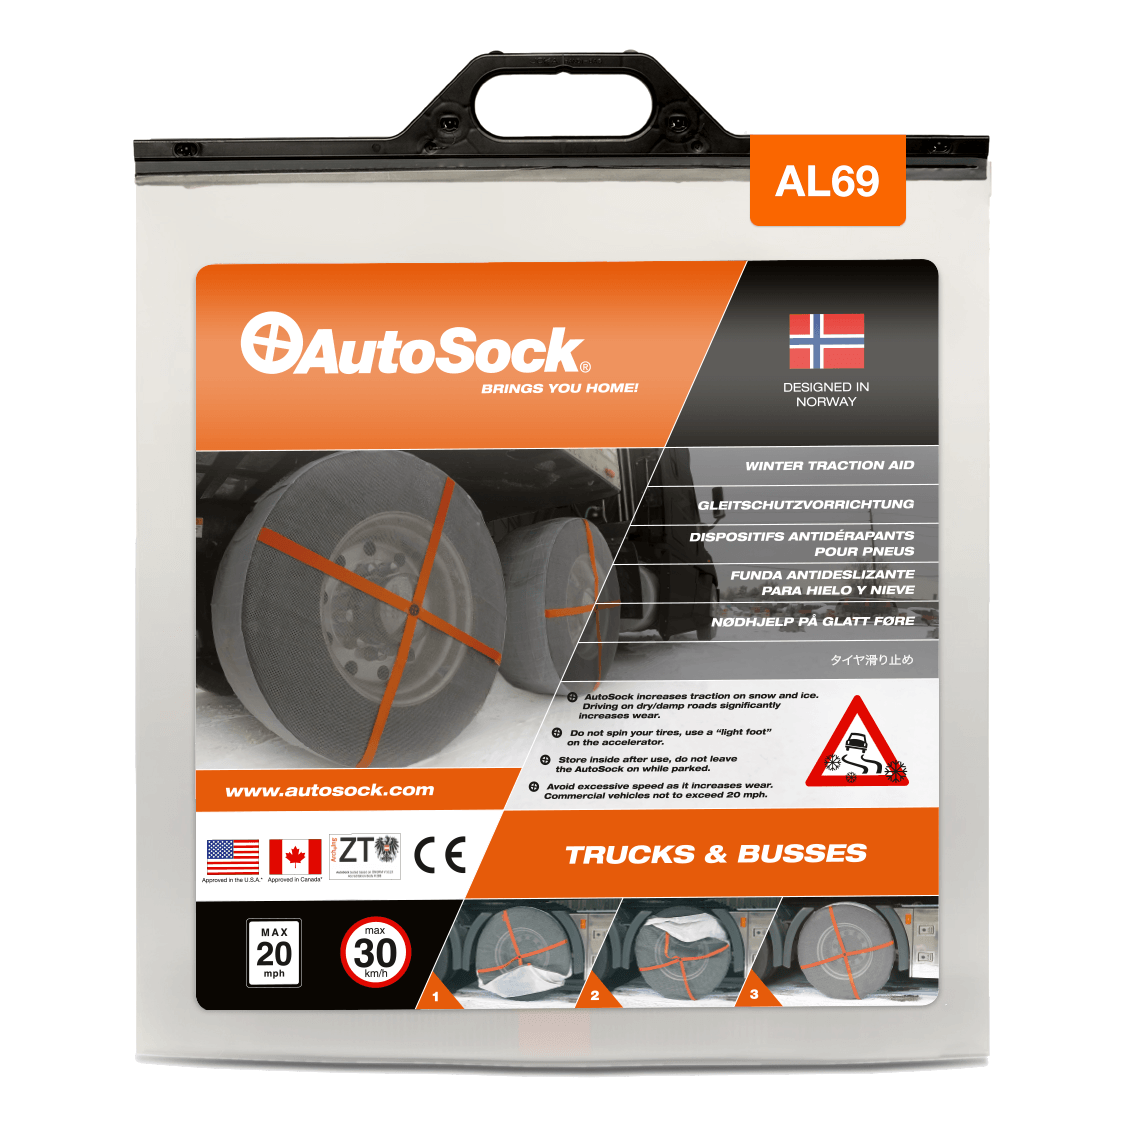 Product Packaging of AutoSock AL 69 AL69 for trucks (front view)